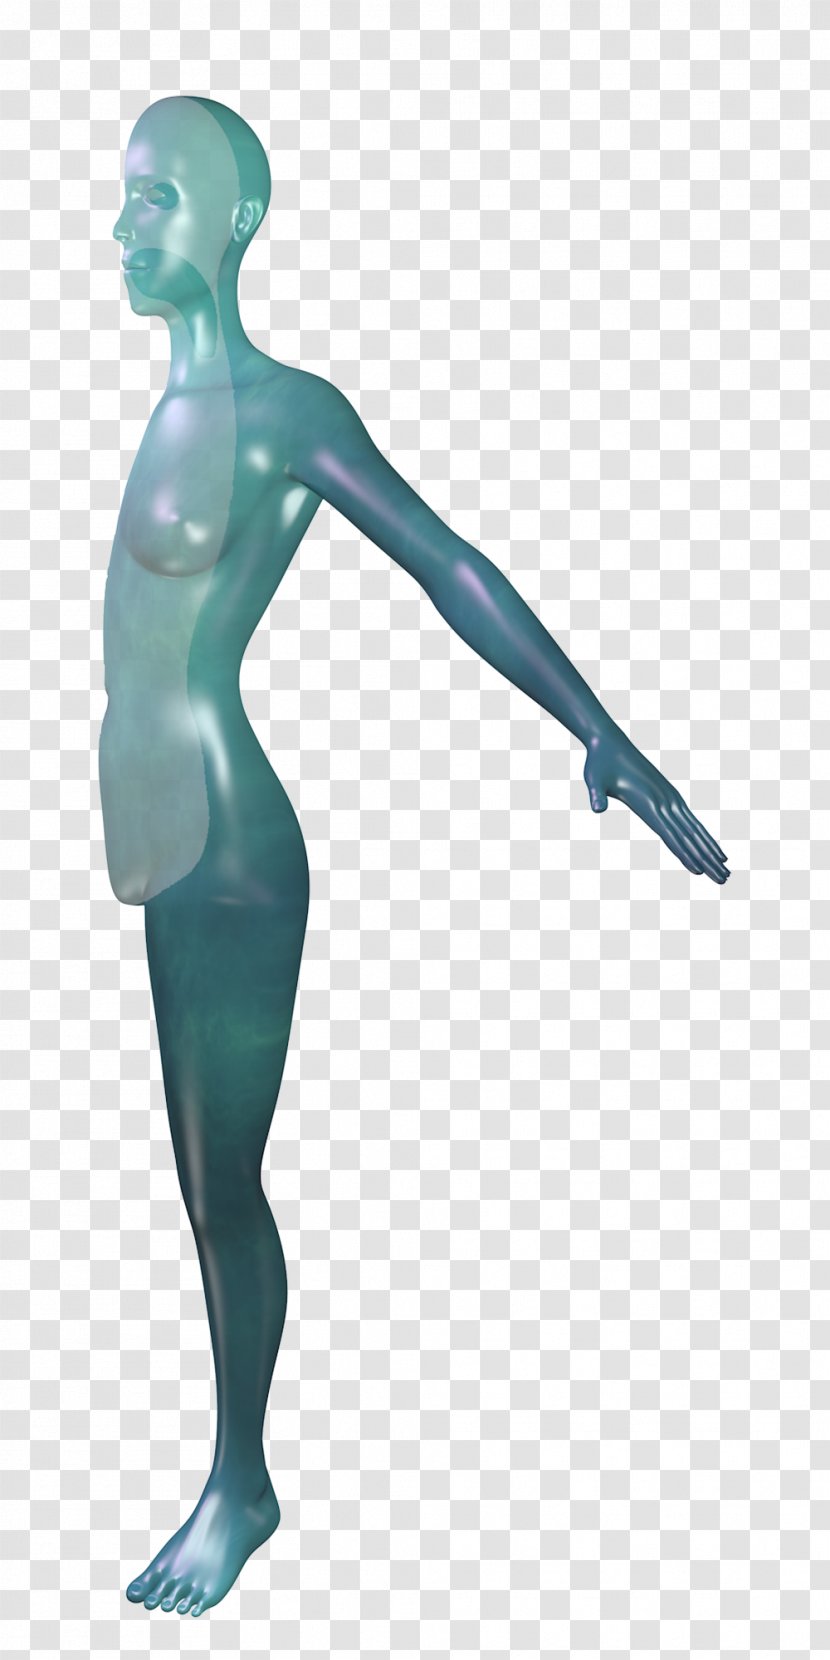 Teal Turquoise Mannequin Figurine Joint - Through The Heart Of Cold Water Beads Transparent PNG